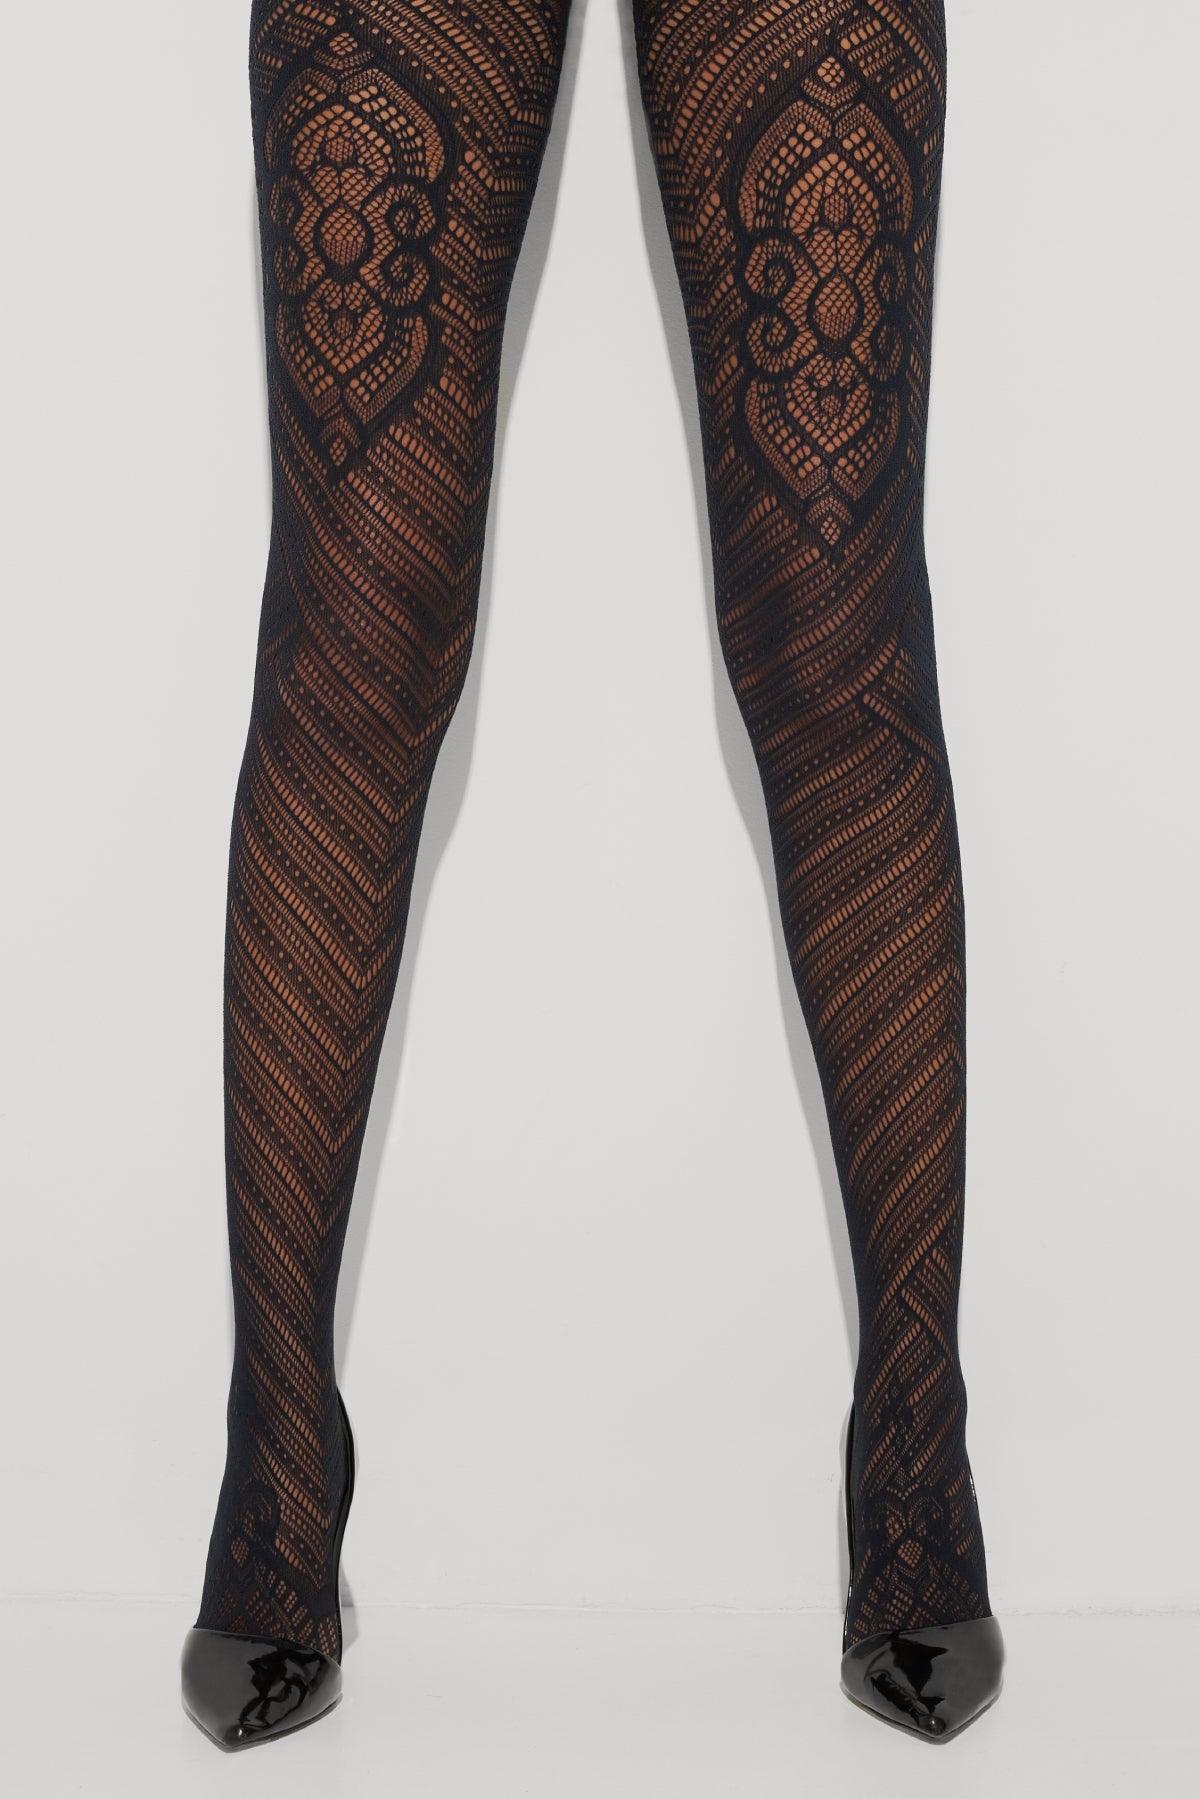 Floral lace-stitch leggings in Black for